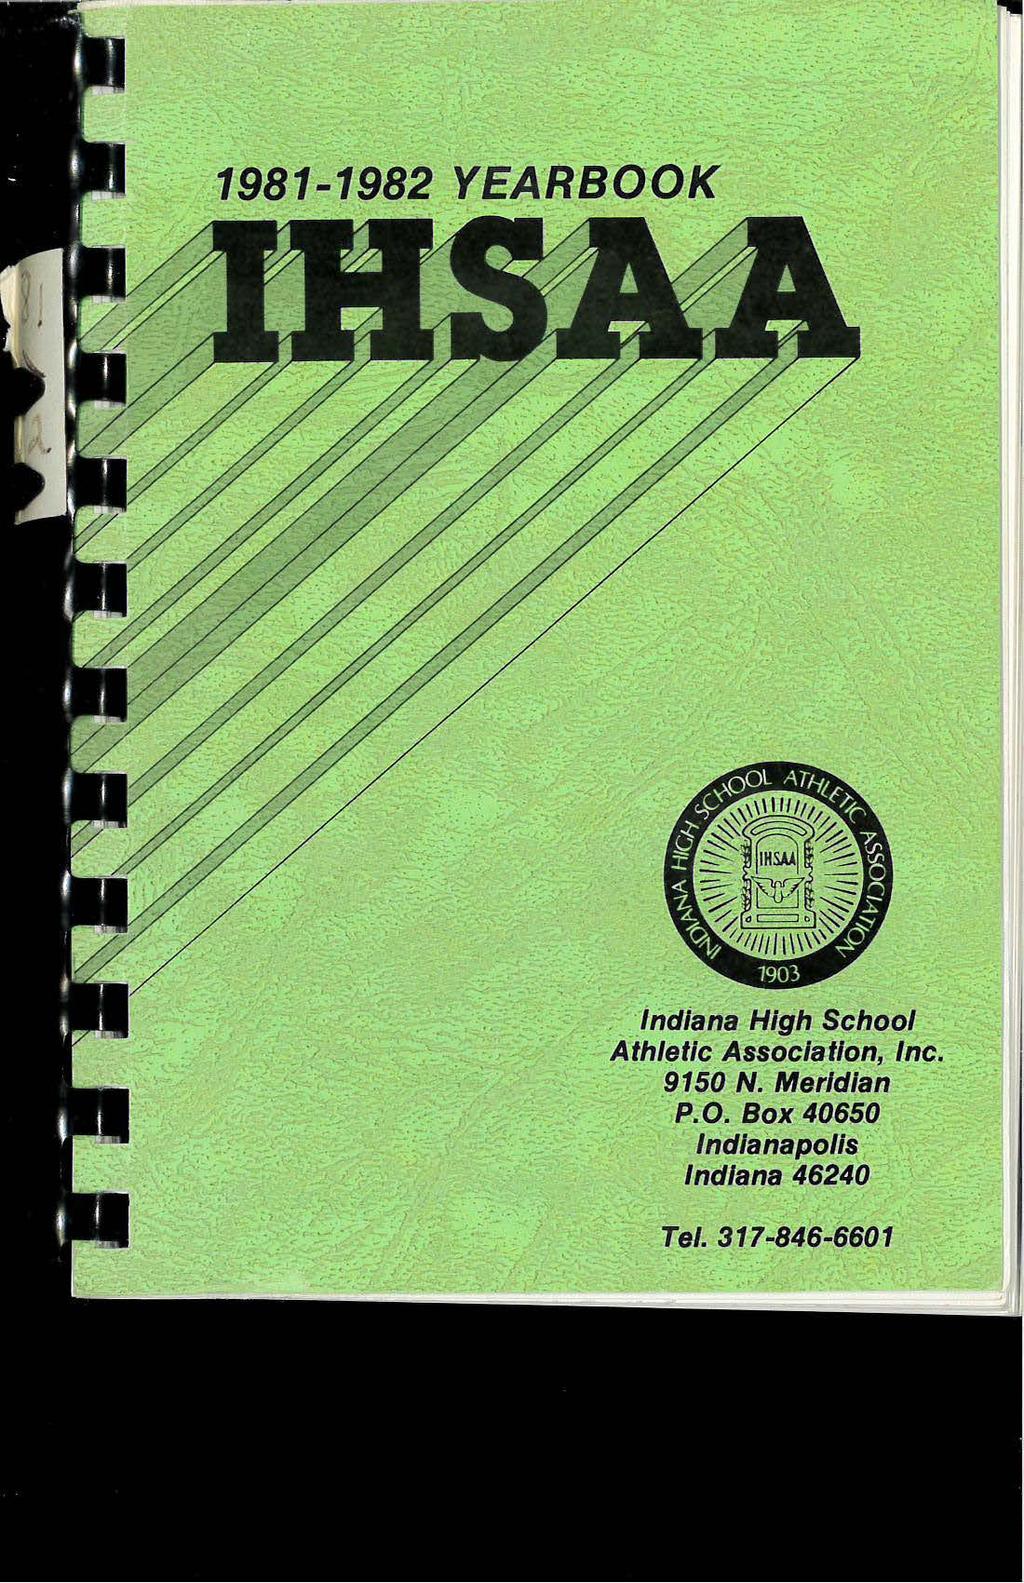 1981-1982 YEARBOOi<,- ~ I., Indiana High School Athletic Association, Inc.